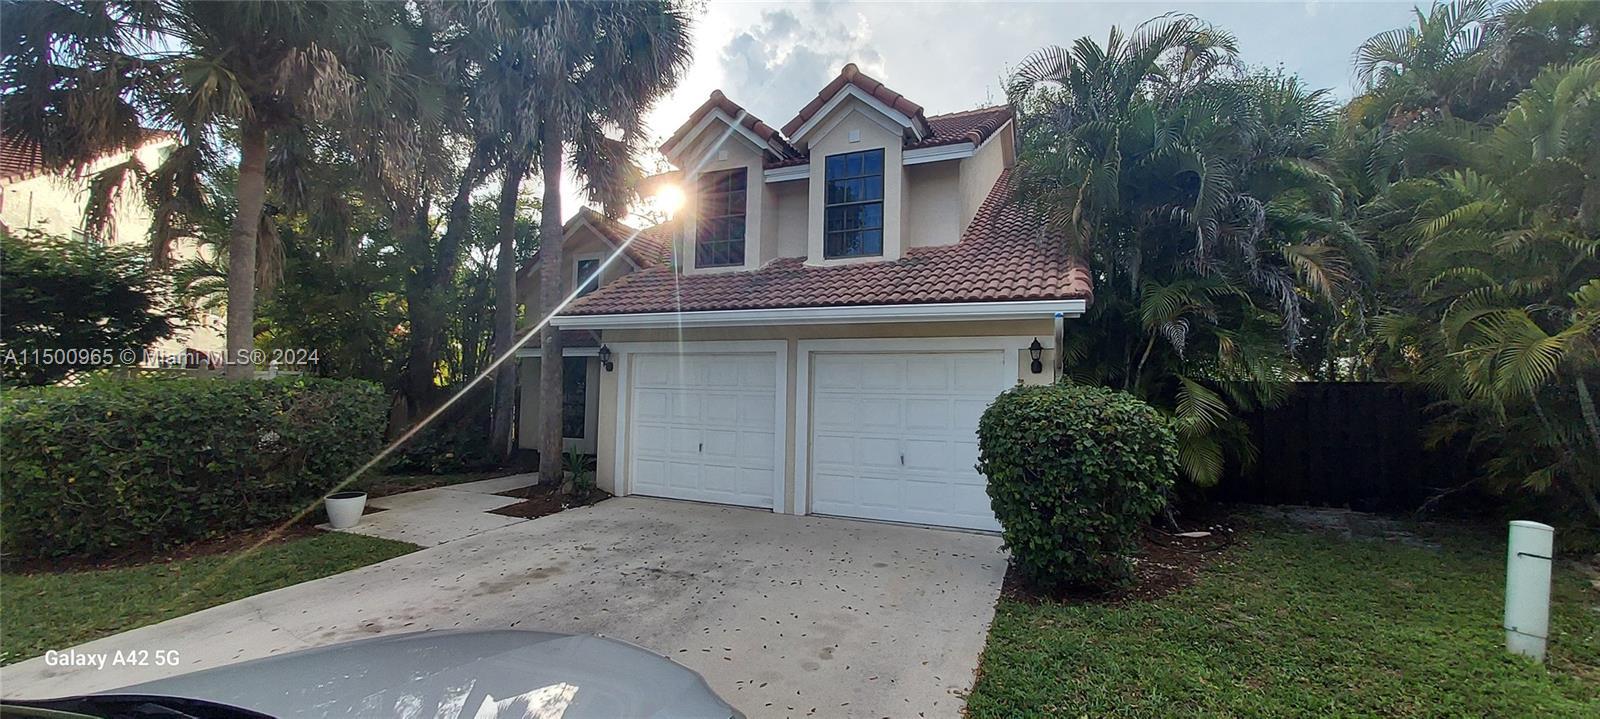 Photo of 6541 NW 57th Ln in Parkland, FL